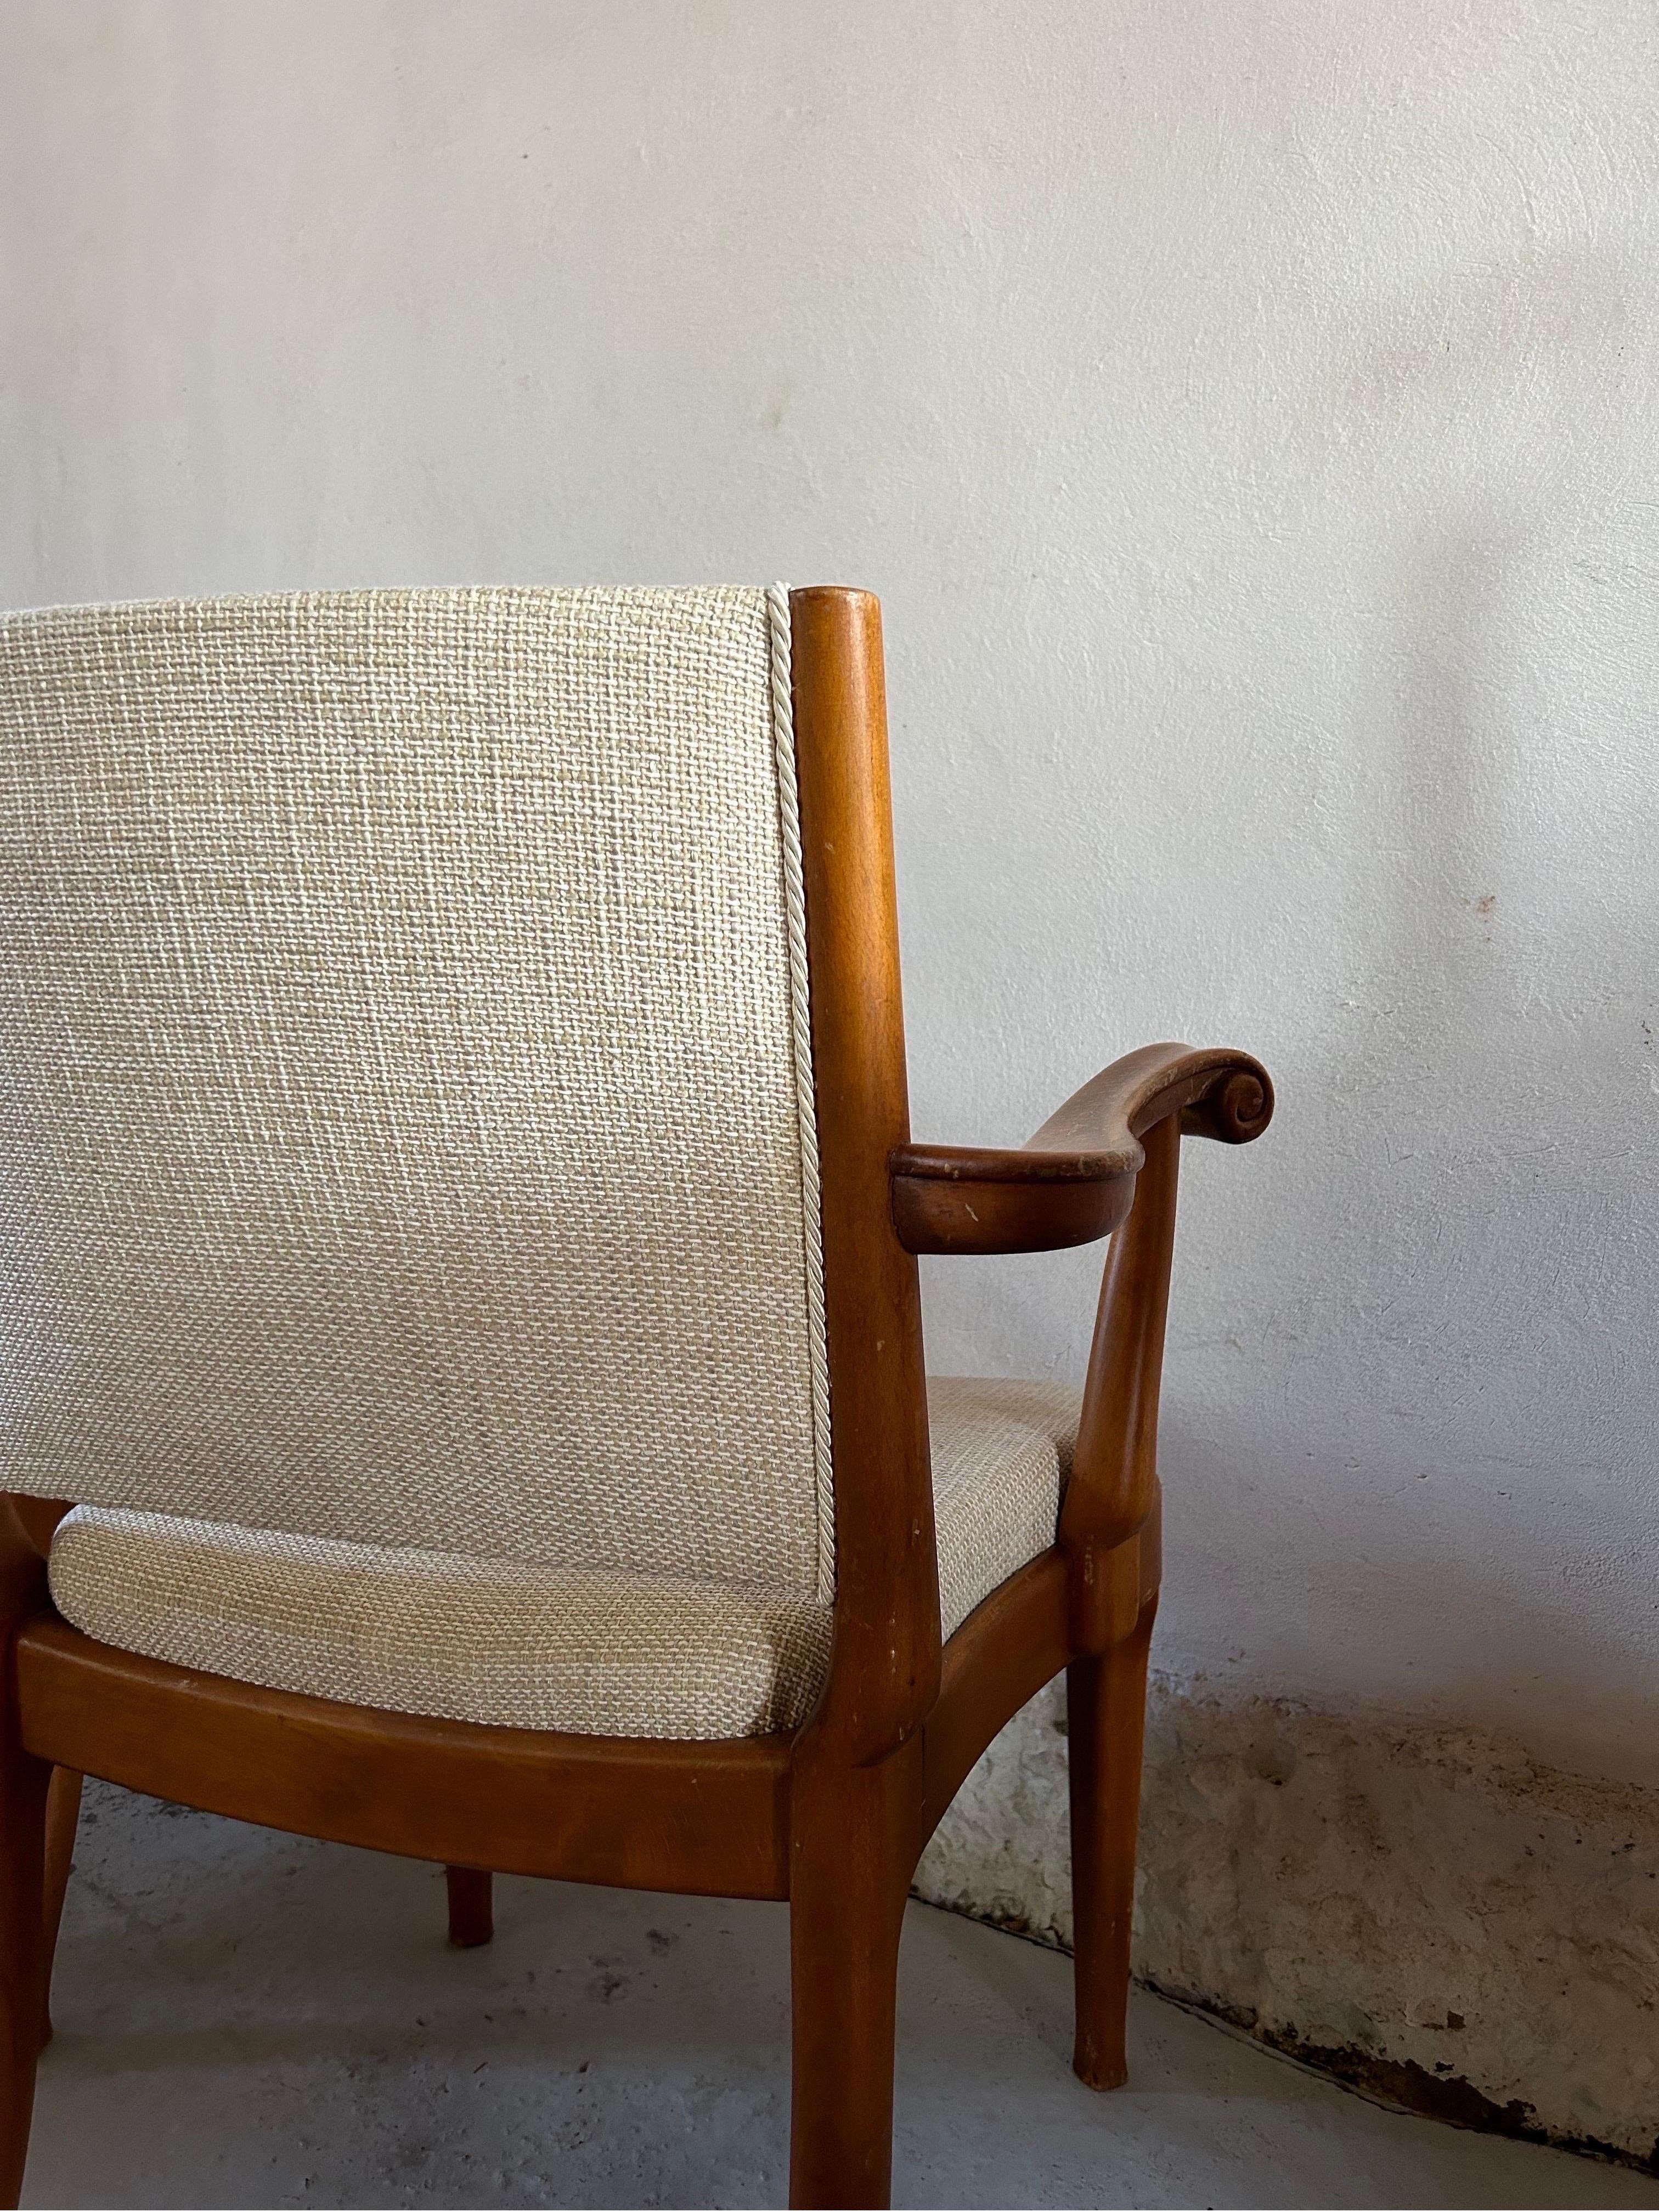 Pair of Arts and Crafts Armchairs by Thorvald Jørgensen for Fritz Hansen 1910’s For Sale 3